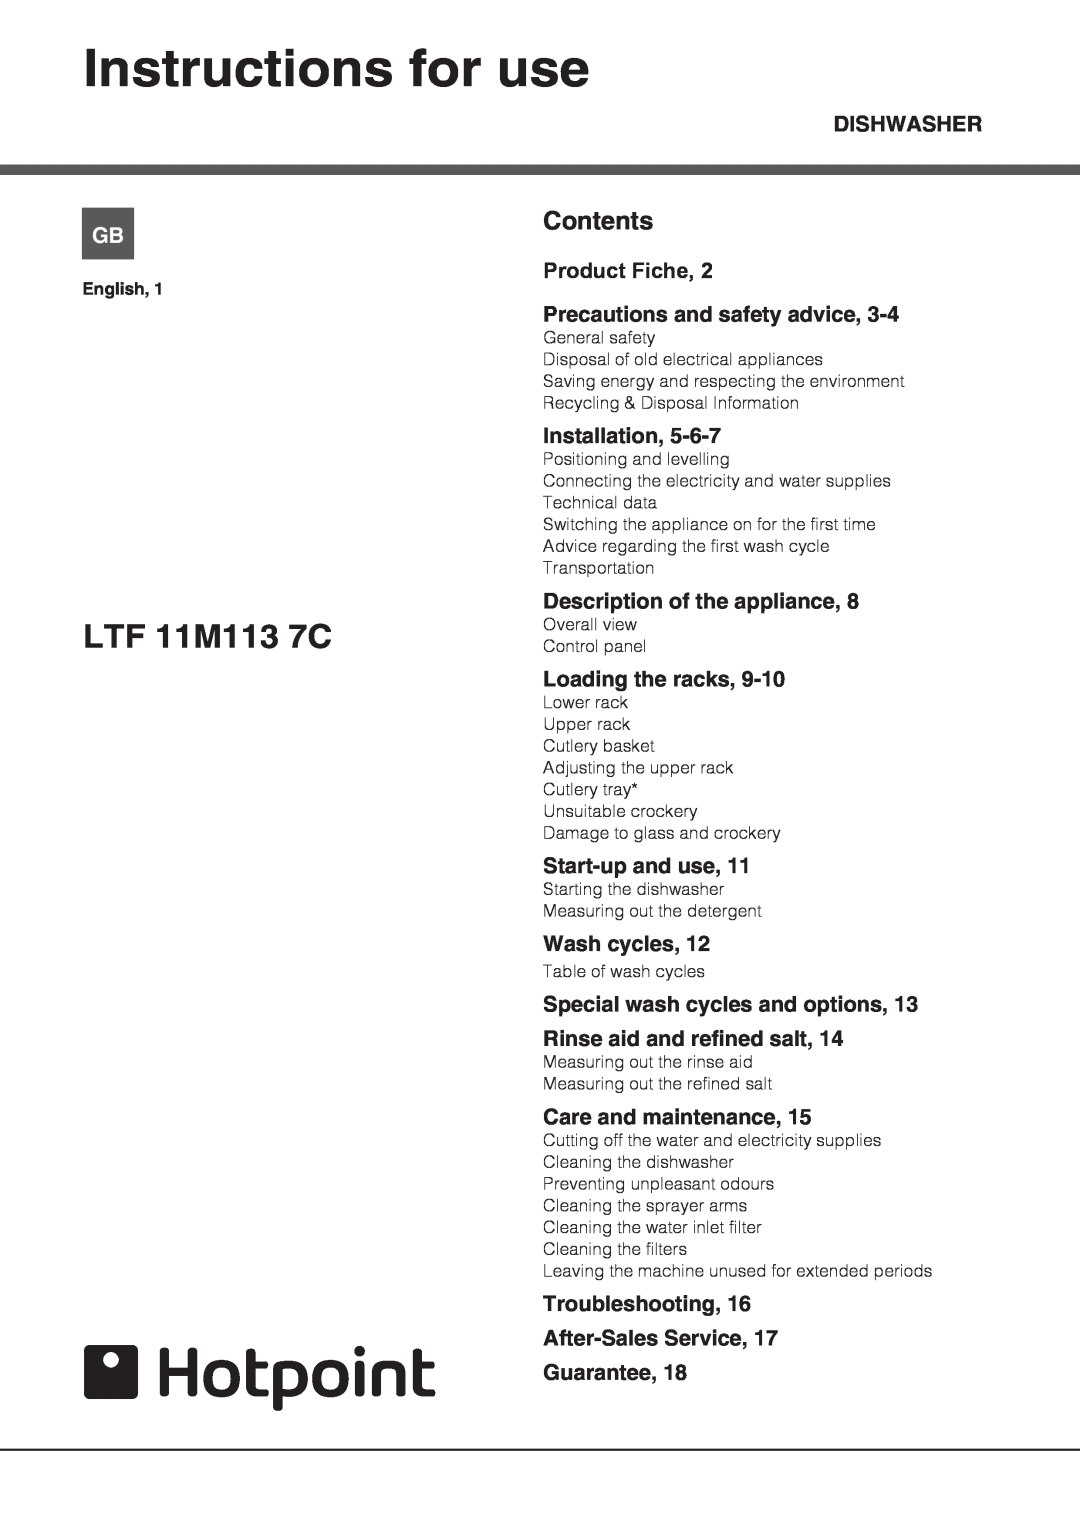 Hotpoint LTF 11M113 7C manual Instructions for use, Contents, Product Fiche 